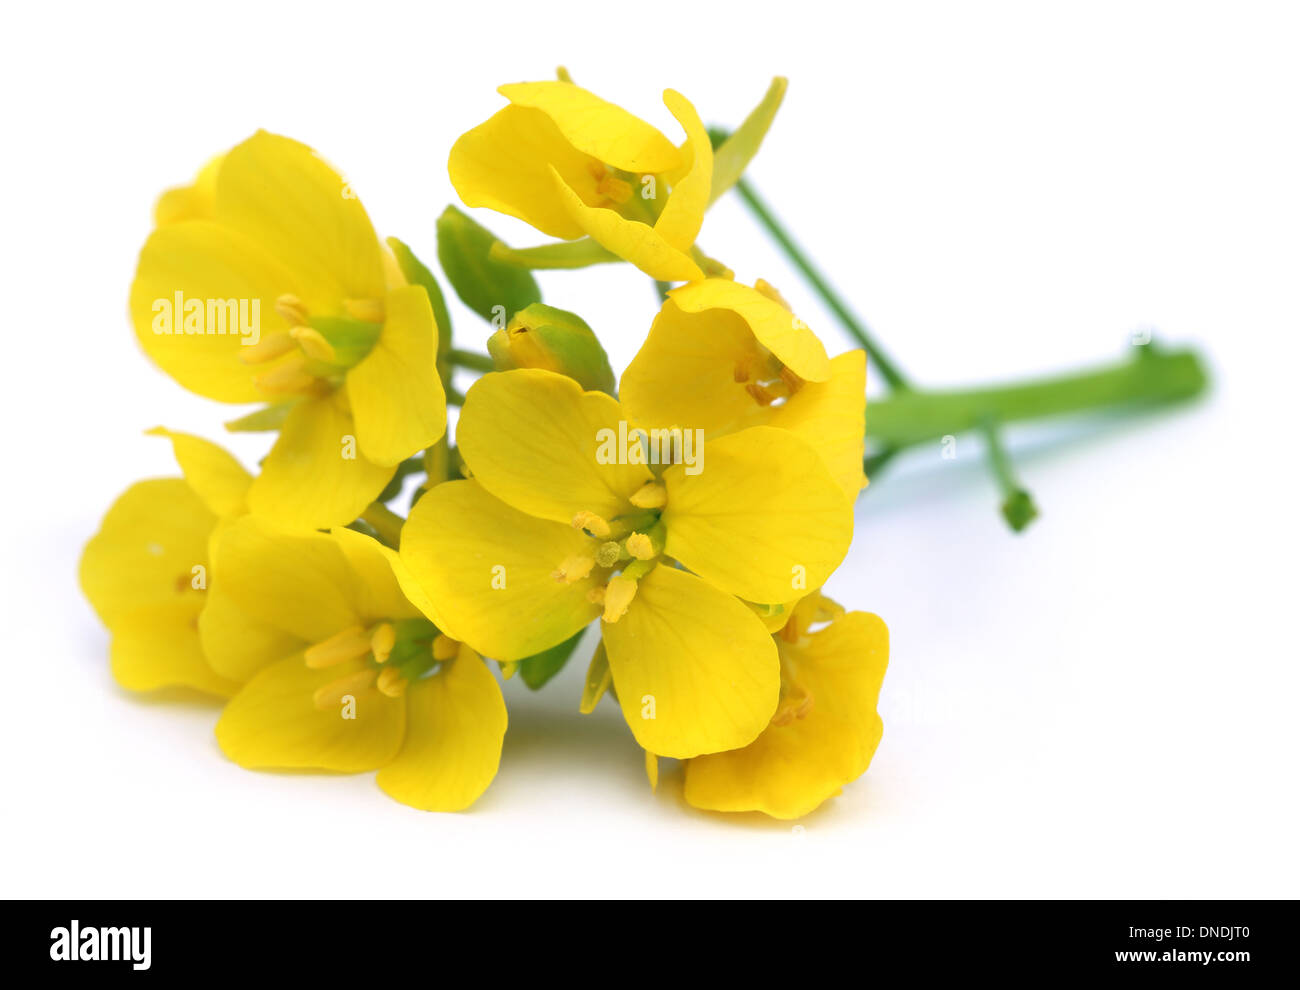 Bunch of edible mustard flowers over white background Stock Photo